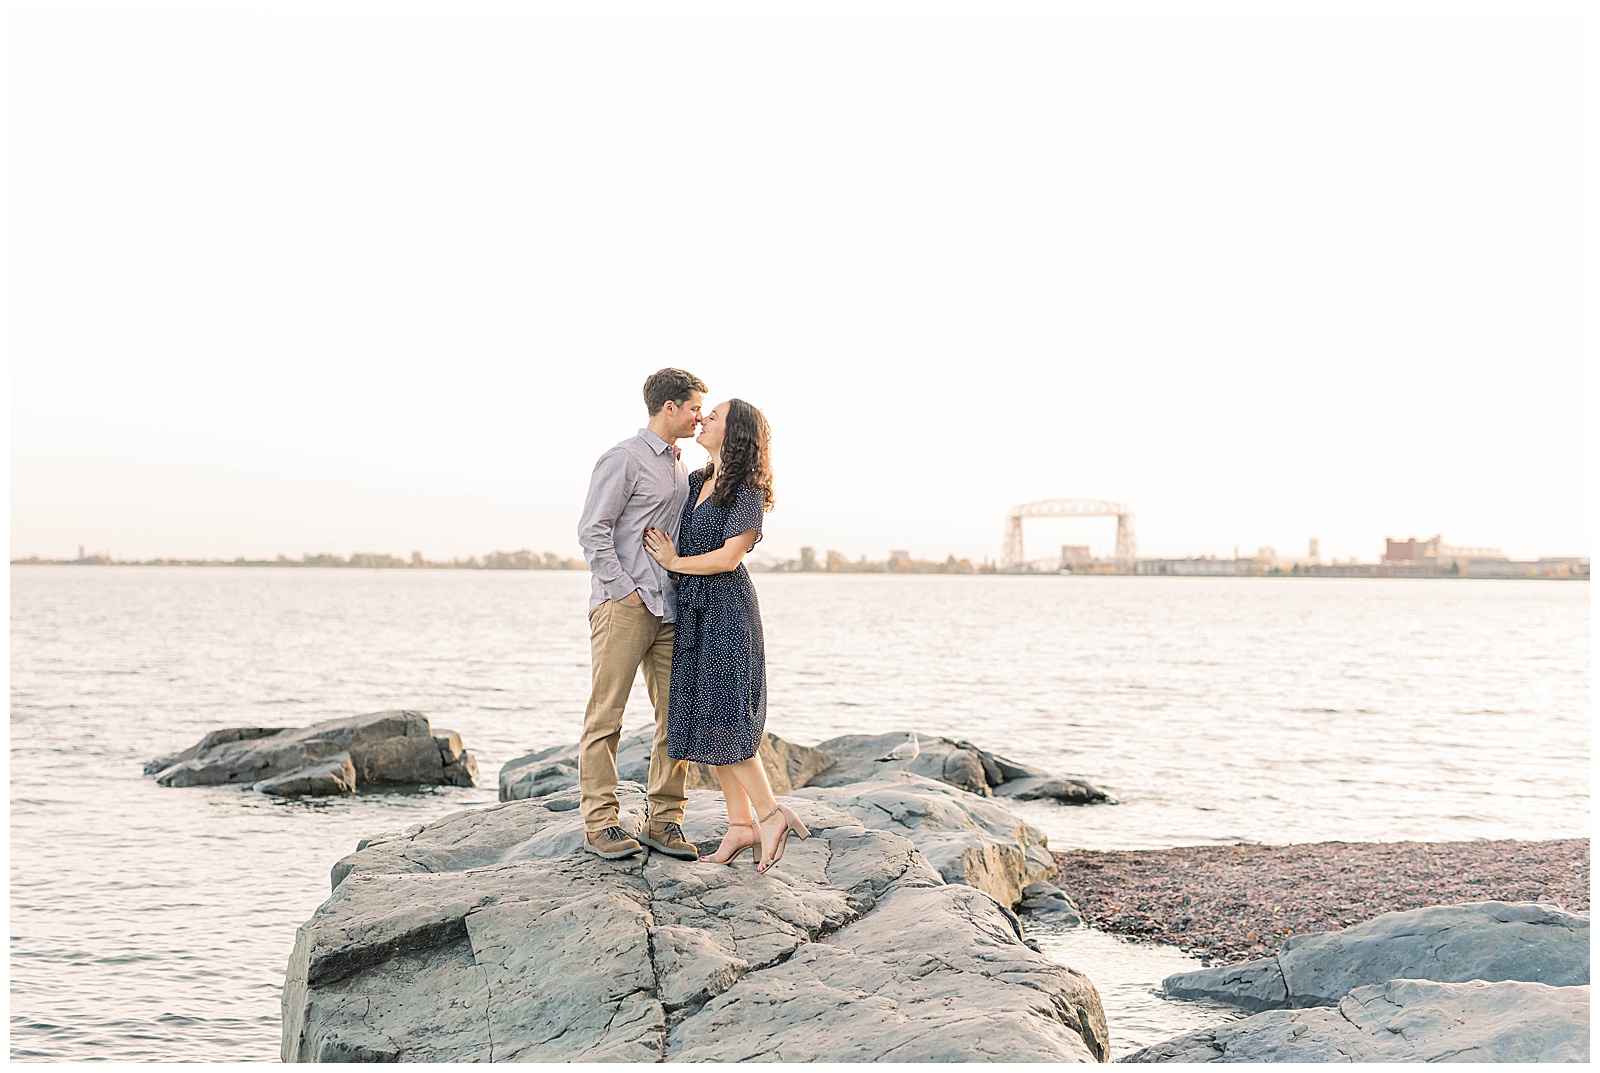 Hartley Nature Center and Leif Erickson Park Engagement Session, Duluth MN  - Stephanie Holsman Photography